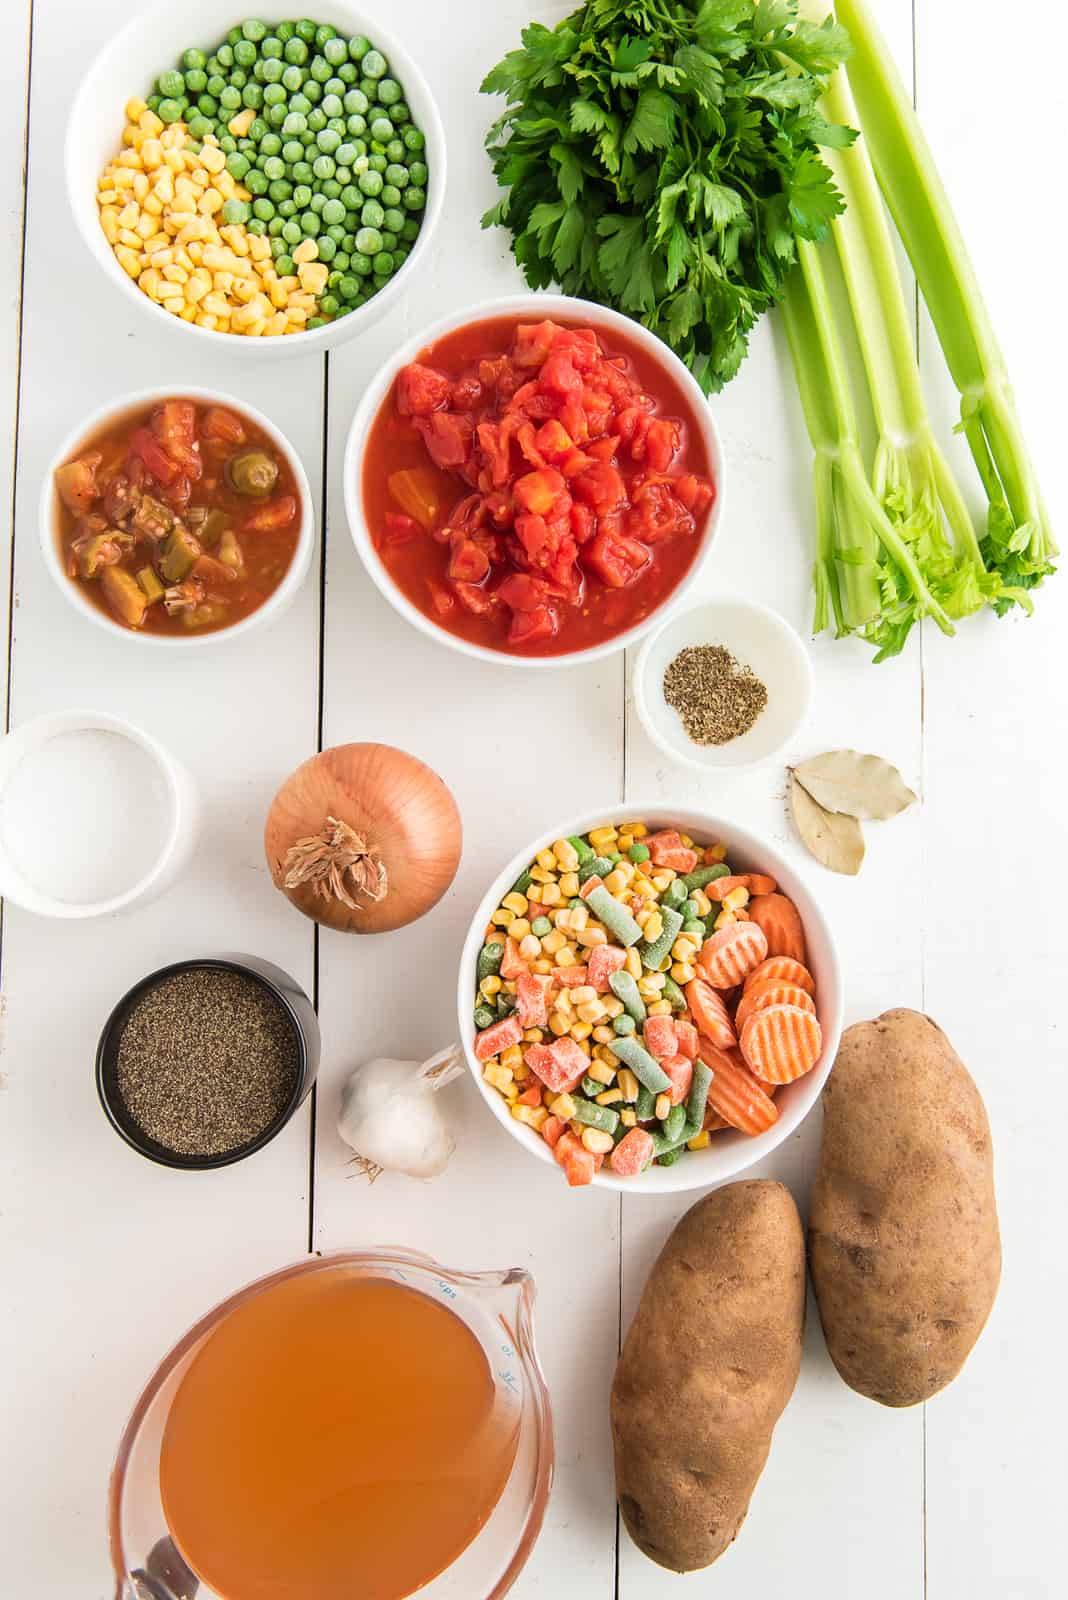 Ingredients needed: onion, celery, olive oil, garlic, frozen mixed vegetables, frozen sliced carrots, frozen peas, frozen corn, diced tomatoes, tomatoes and okra, vegetable broth, potato, bay leaves, salt, pepper, dried basil, dried oregano and parsley..